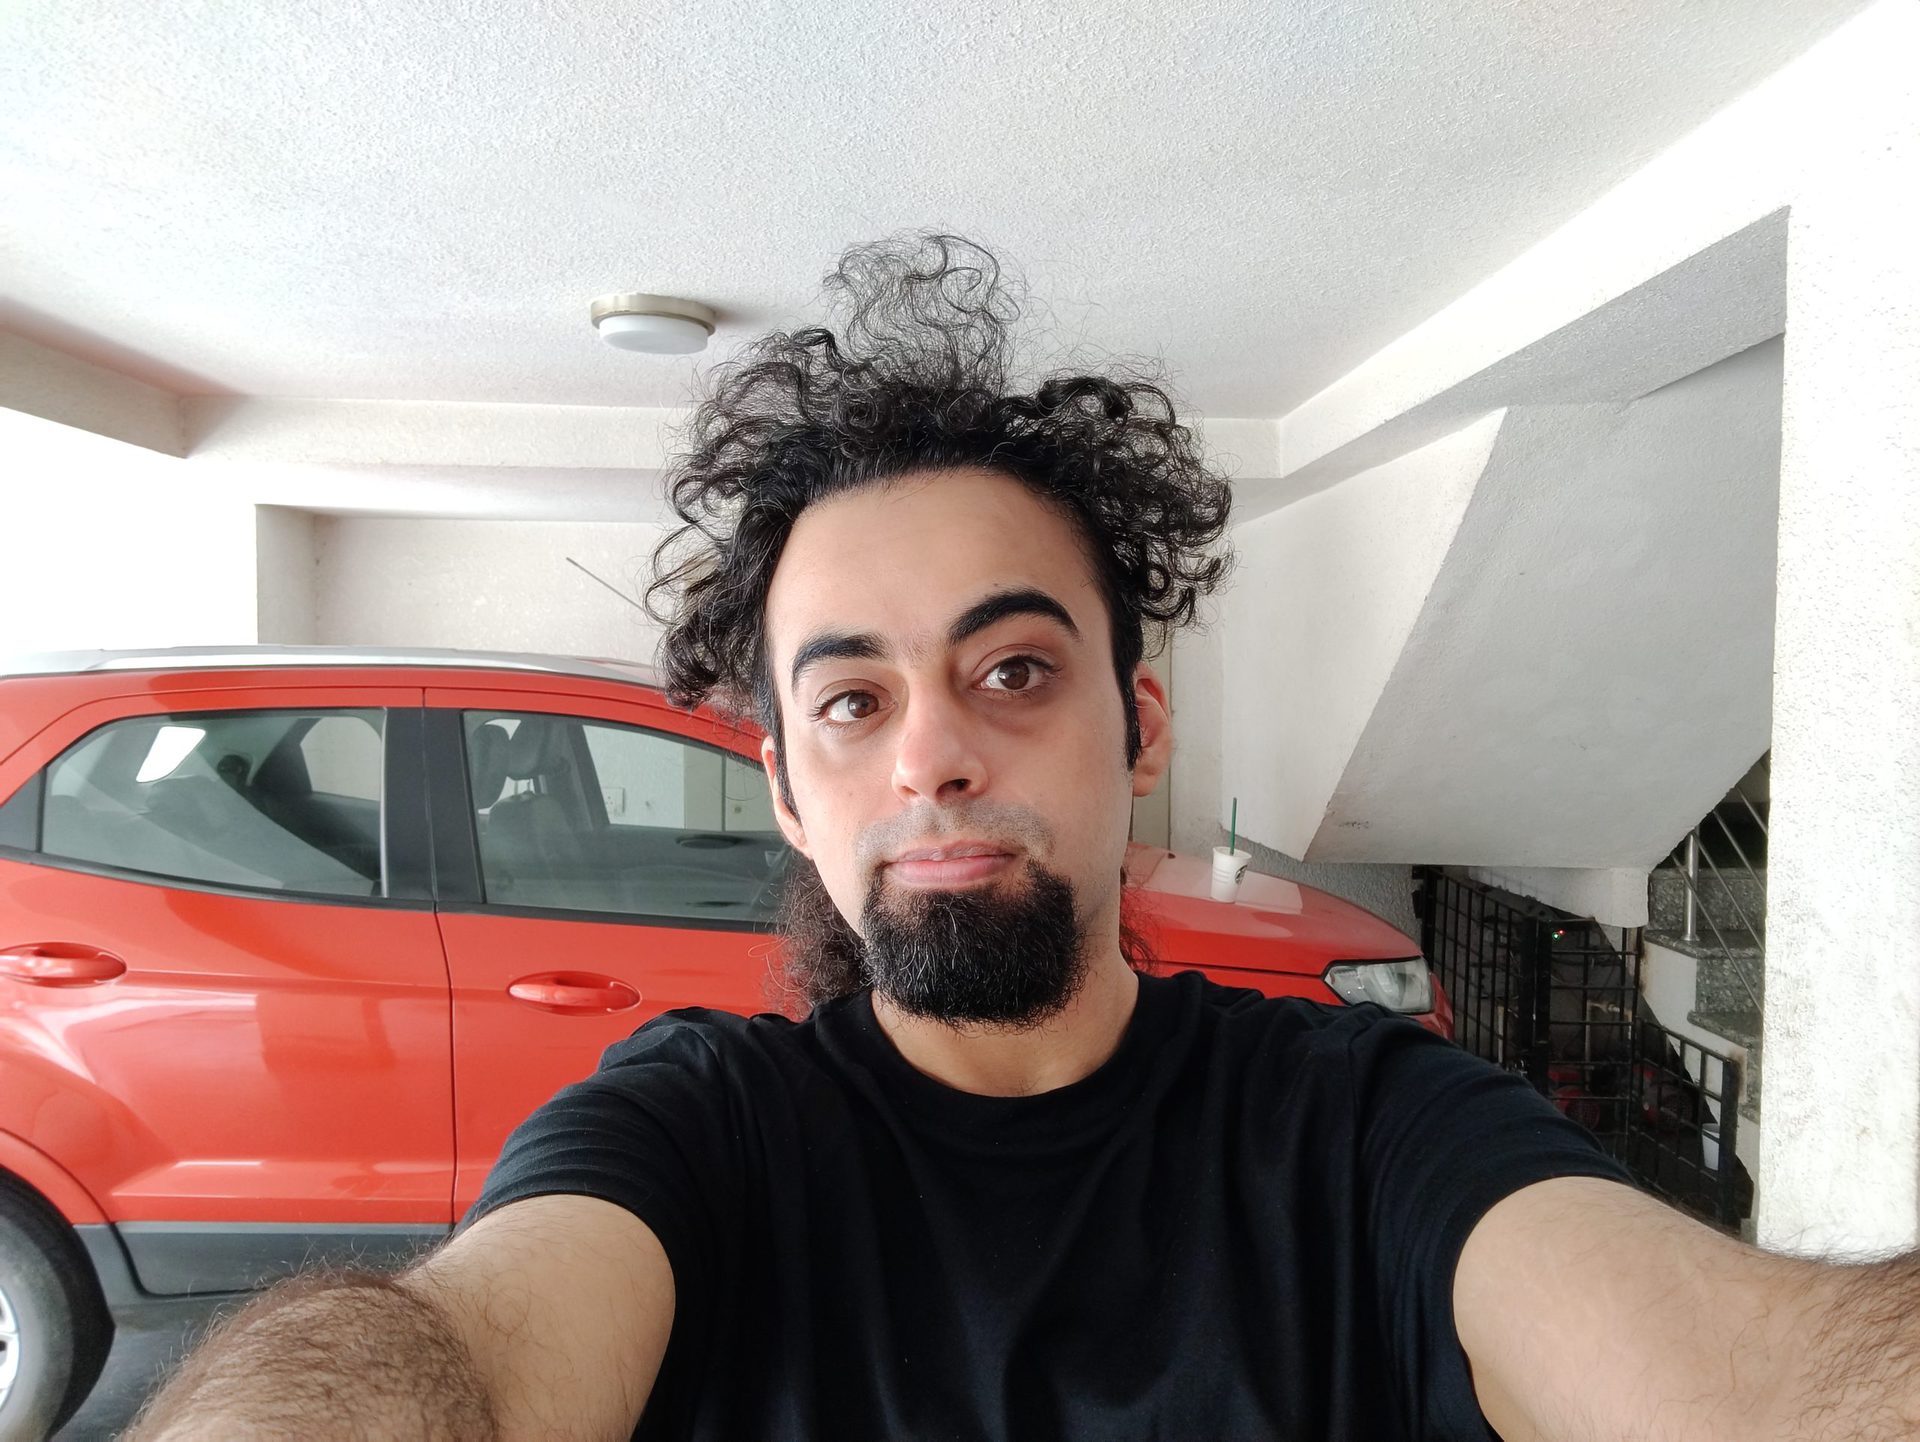 The OnePlus Nord primary selfie indoors of a man with black hair and a beard, wearing a black t-shirt and standing in front of a red vehicle.